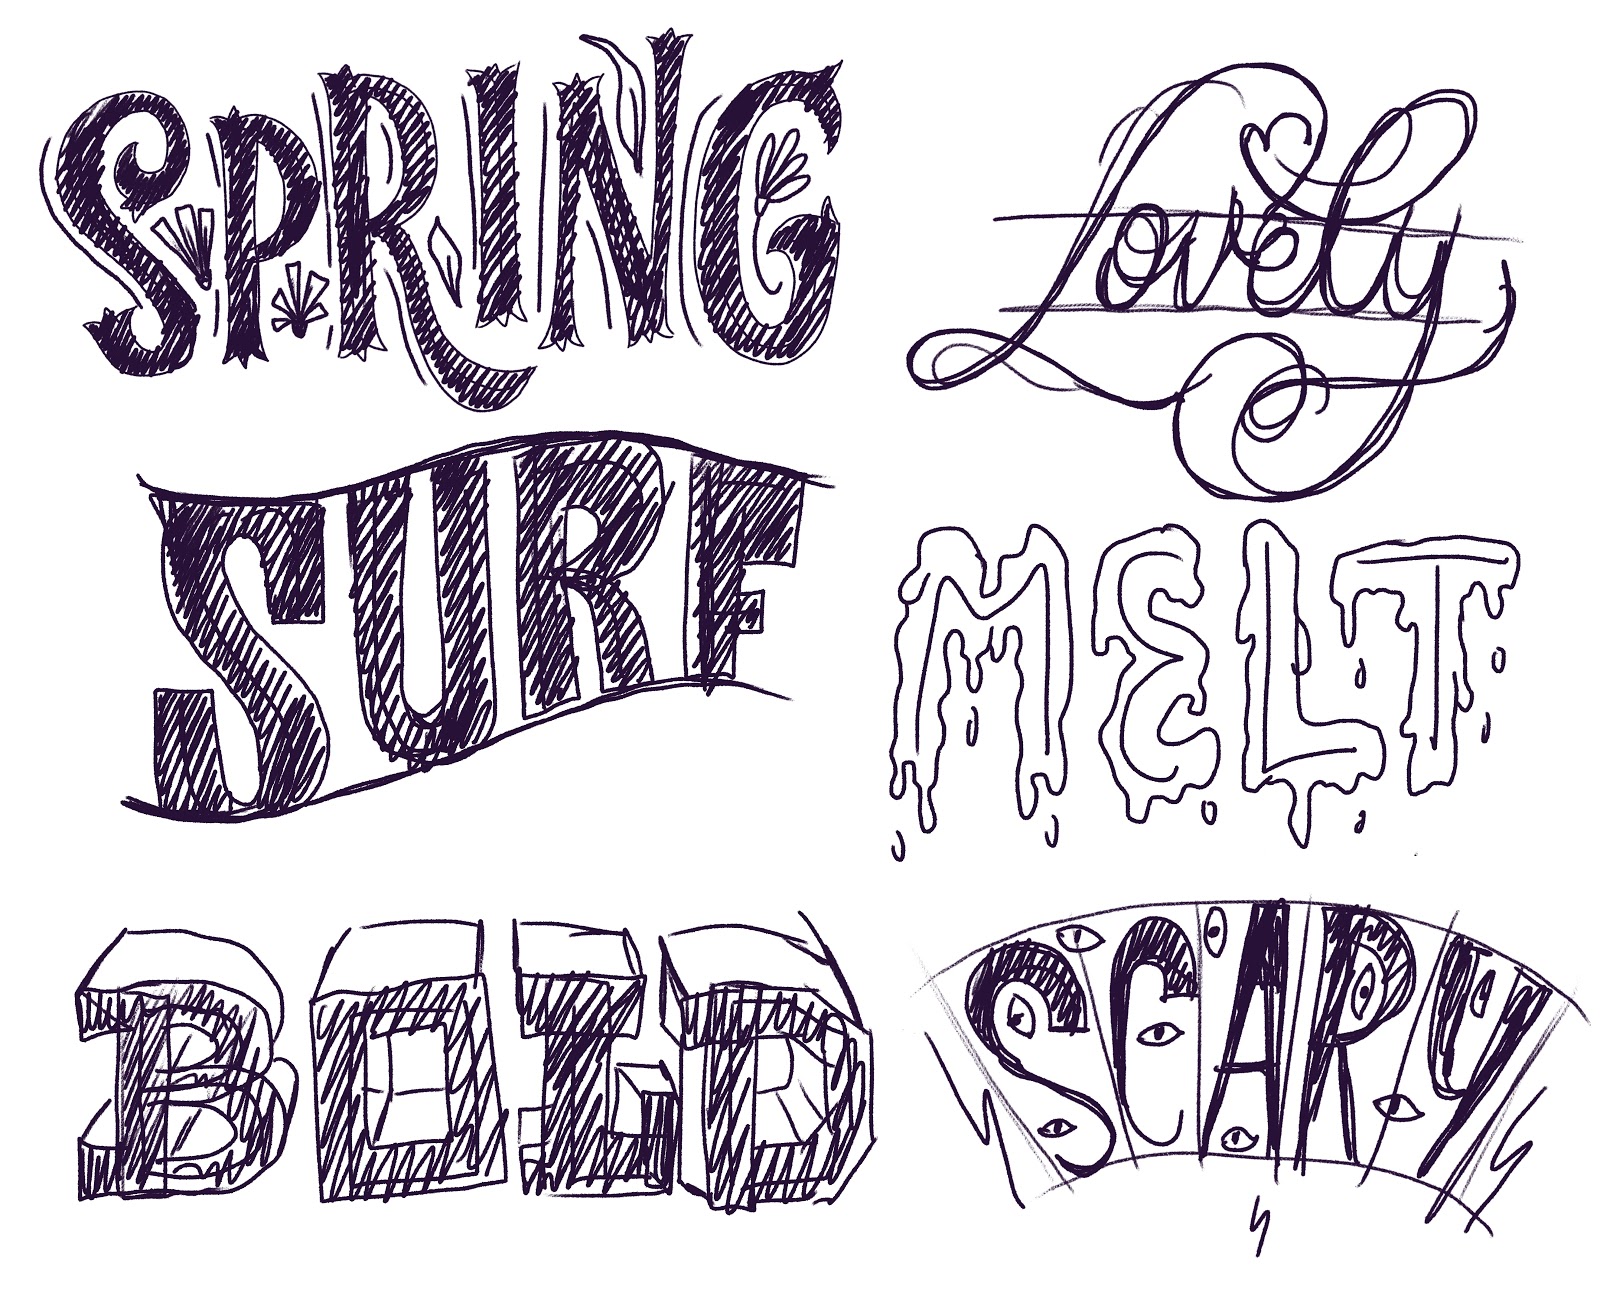 Sketch Font: Learn to Create Effect Using Adobe Illustrator